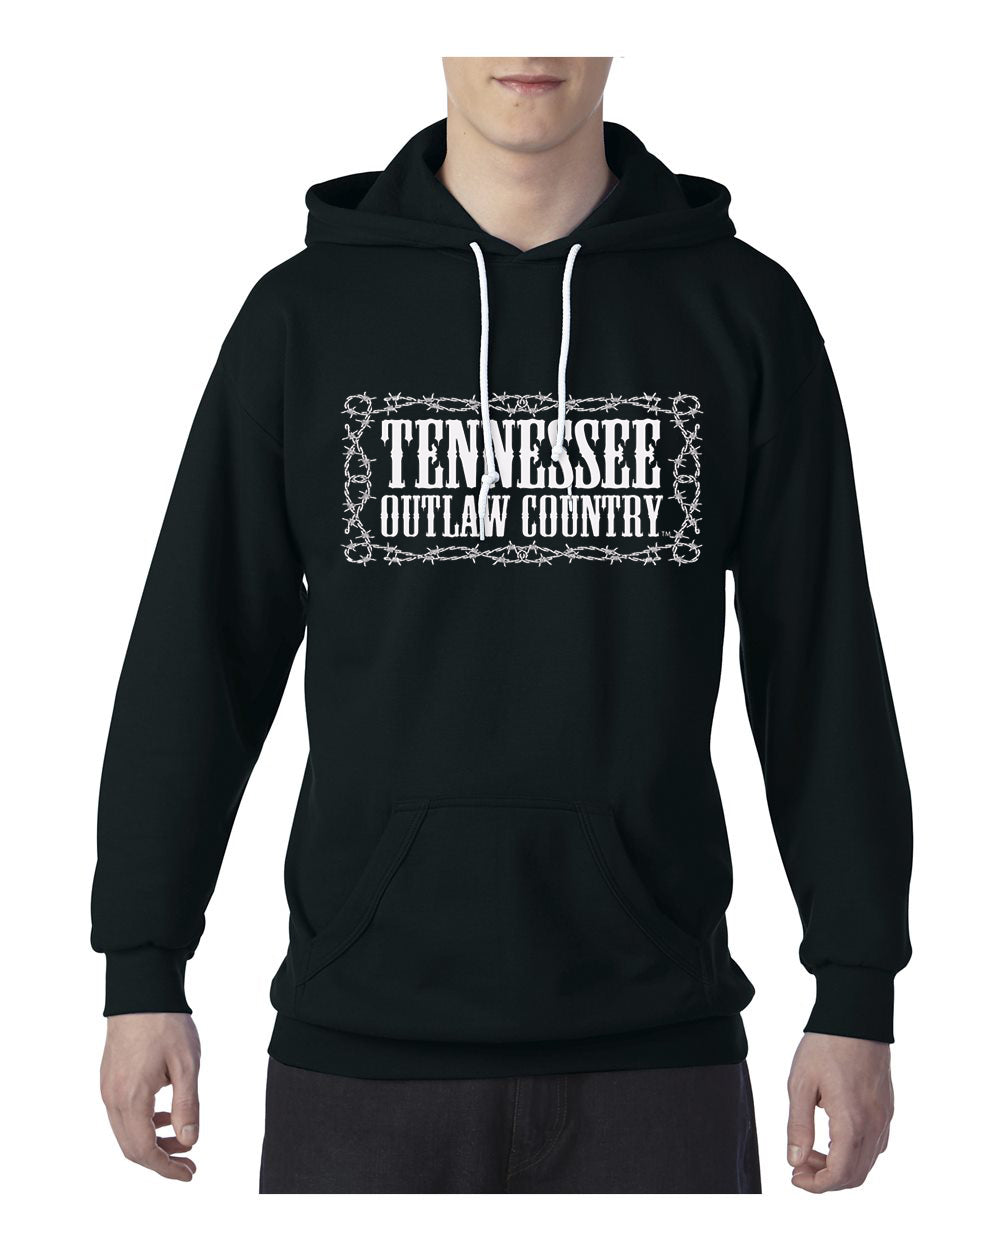 Tennessee Outlaw Country Pocket Hoodie